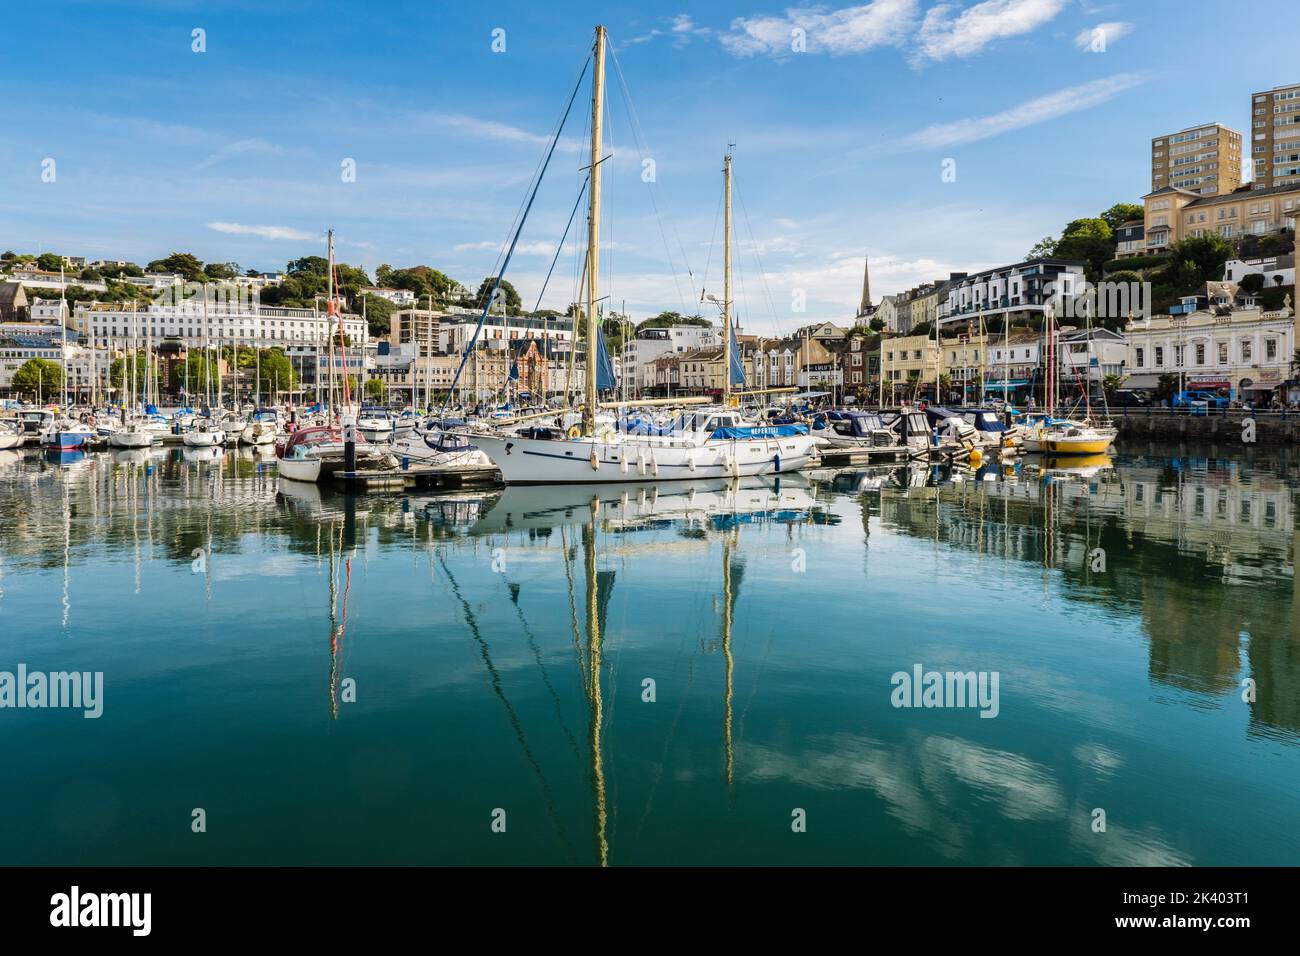 Boats moored in the harbour reflected in the calm water of the Inner Dock. Torquay, Devon, England, UK, Britain Stock Photo